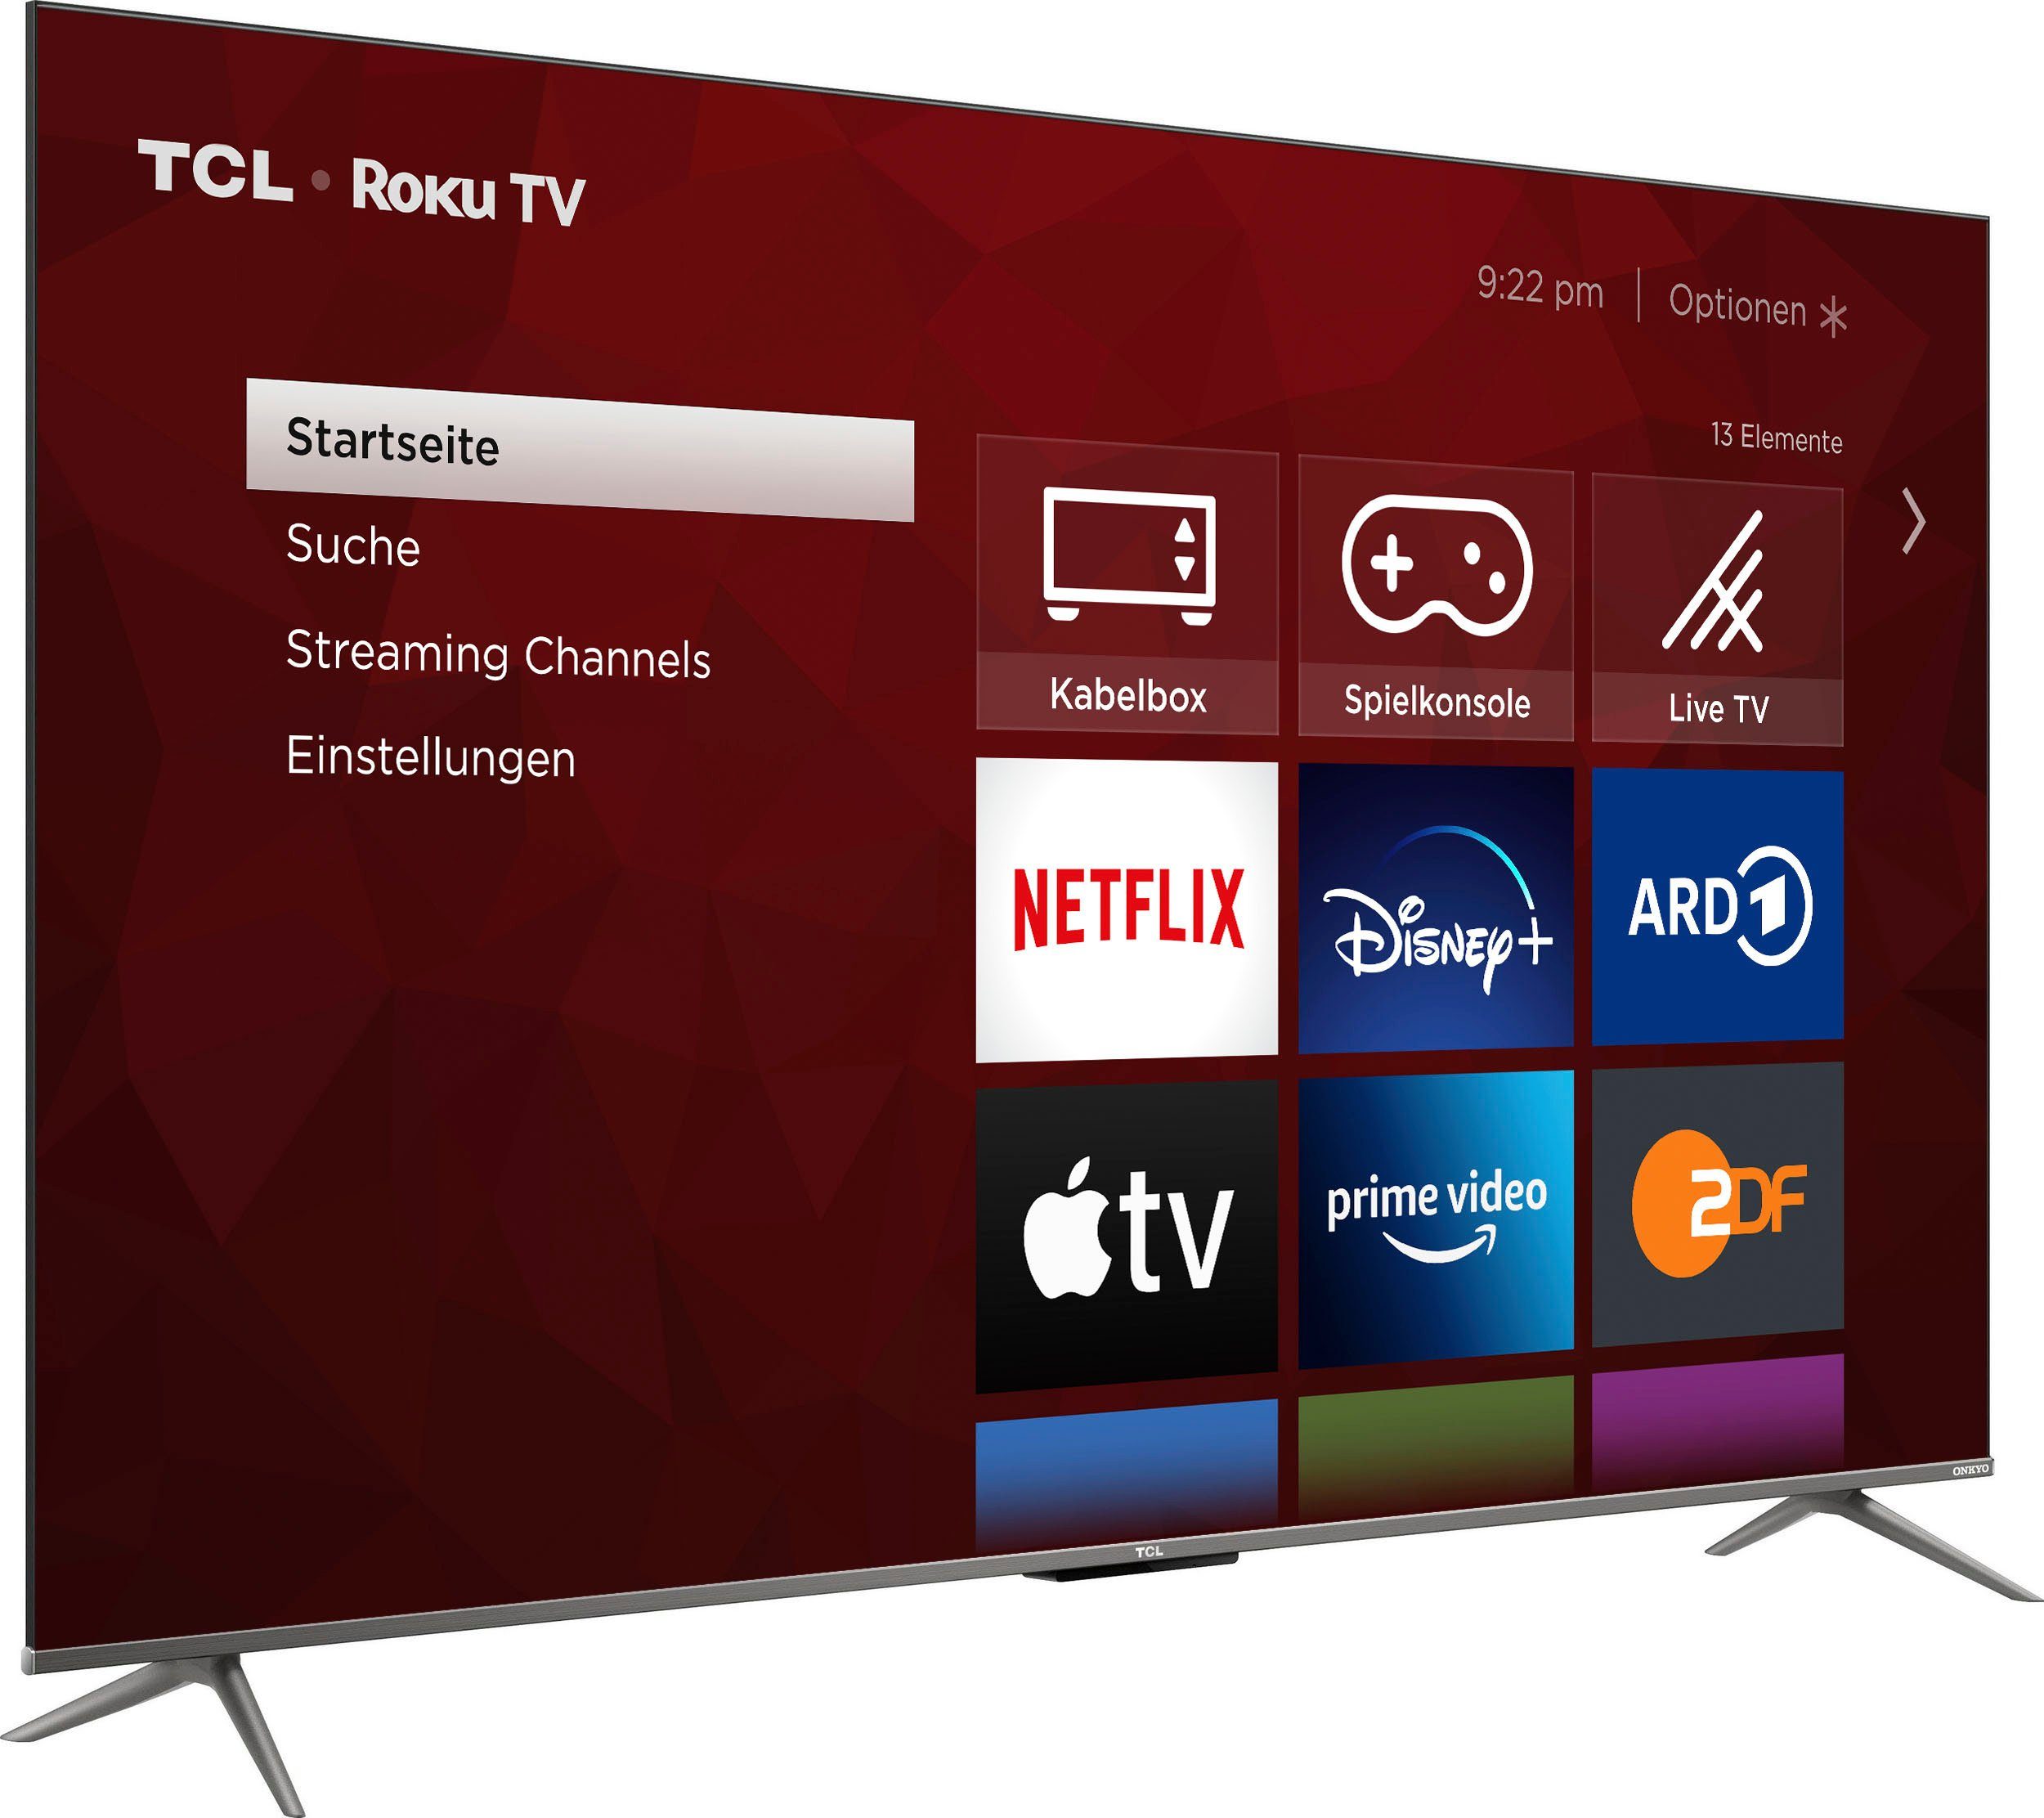 TCL 55RP630X1 LED-Fernseher HDMI HD, Master, Roku 2.1) HDR, Game 4K cm/55 TV, HDR10, Dolby Vision, Zoll, (139 Smart-TV, Ultra